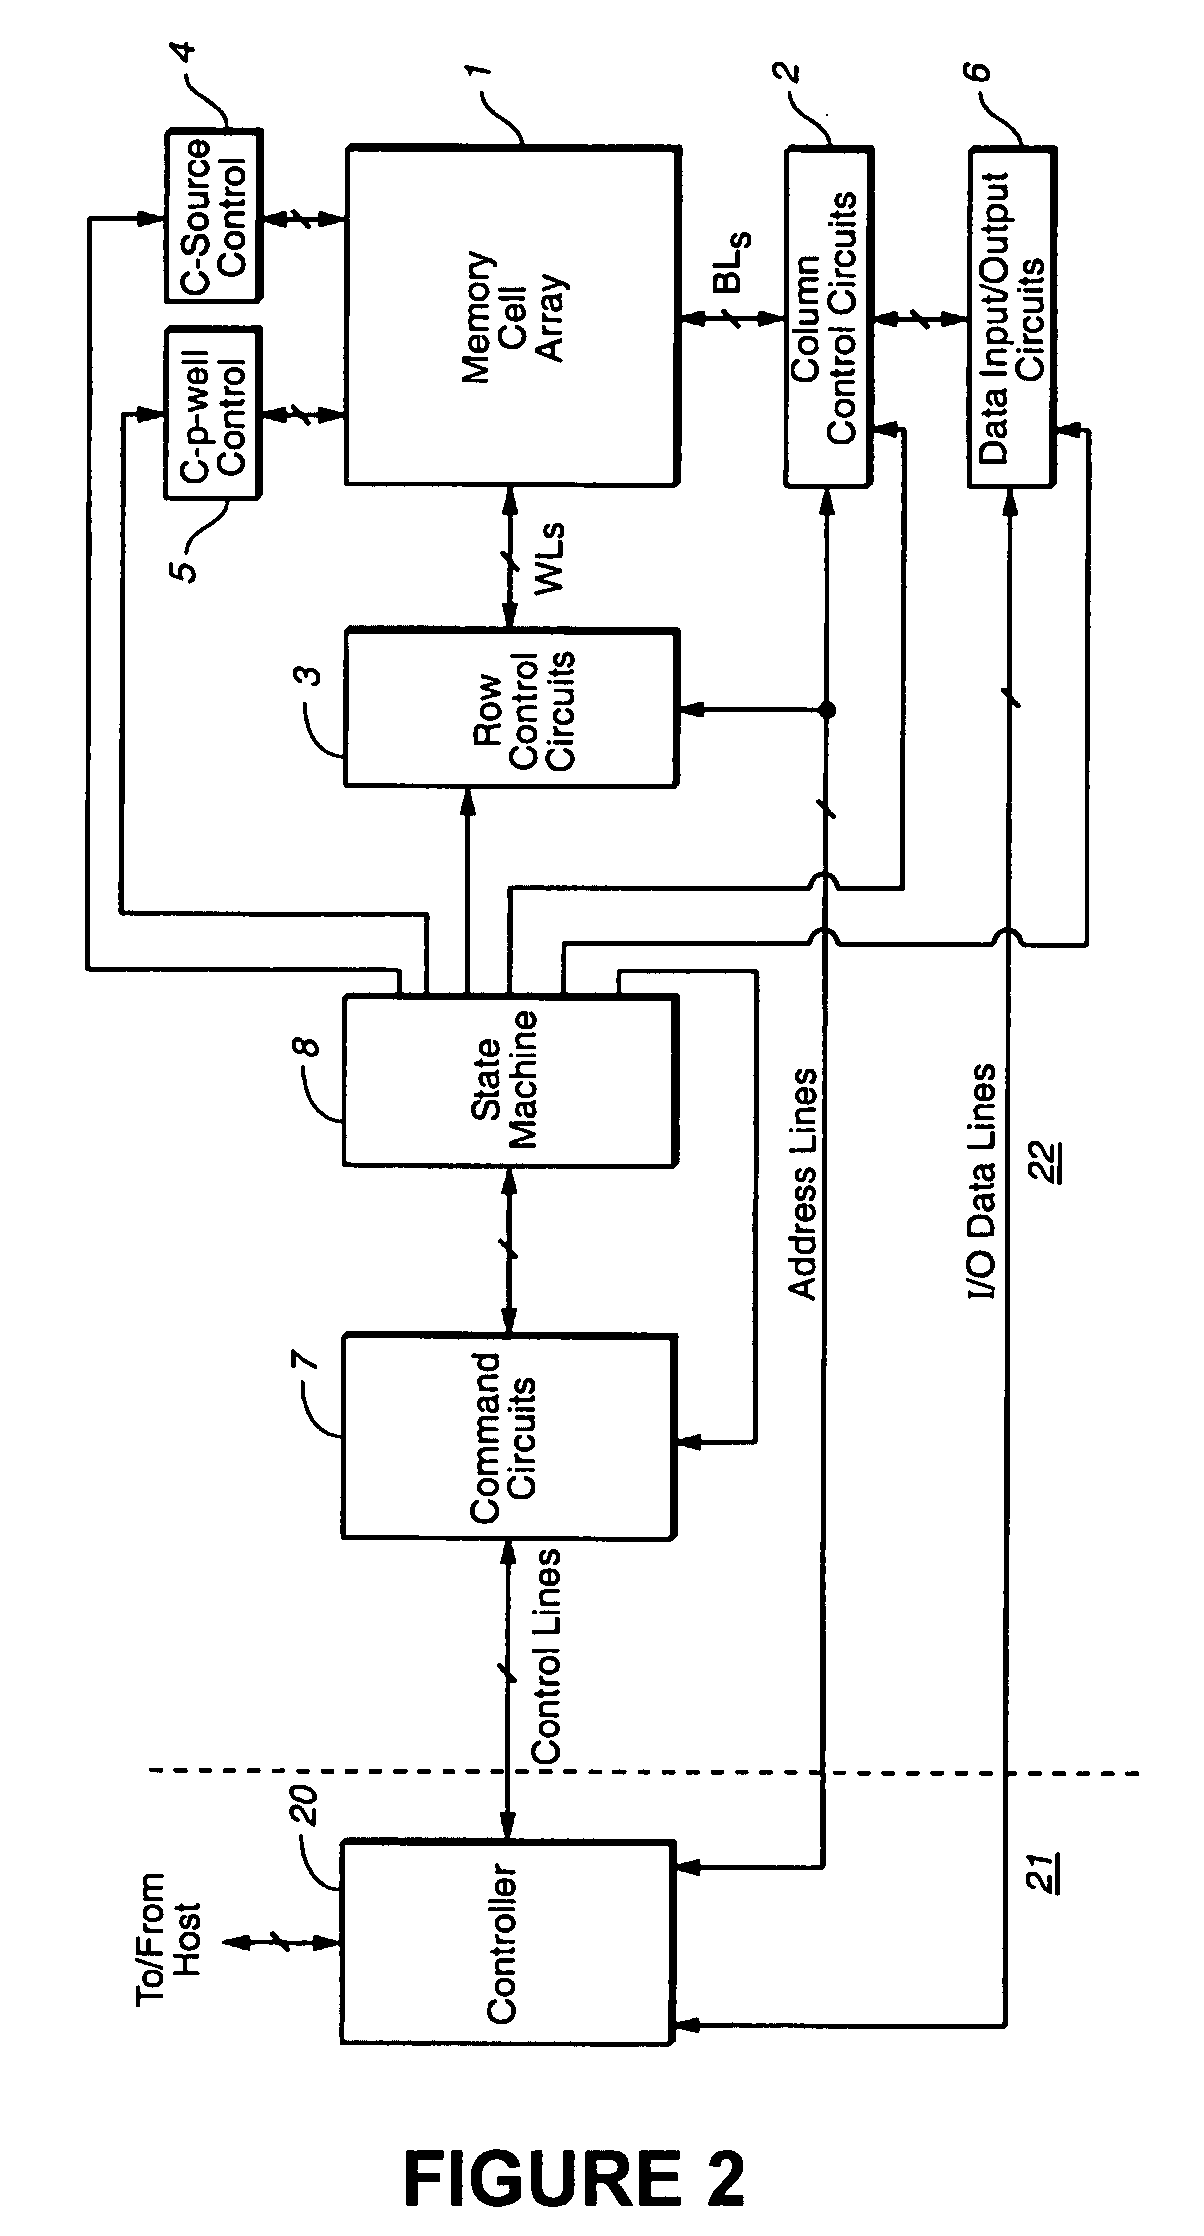 Flash memory device and system with randomizing for suppressing errors